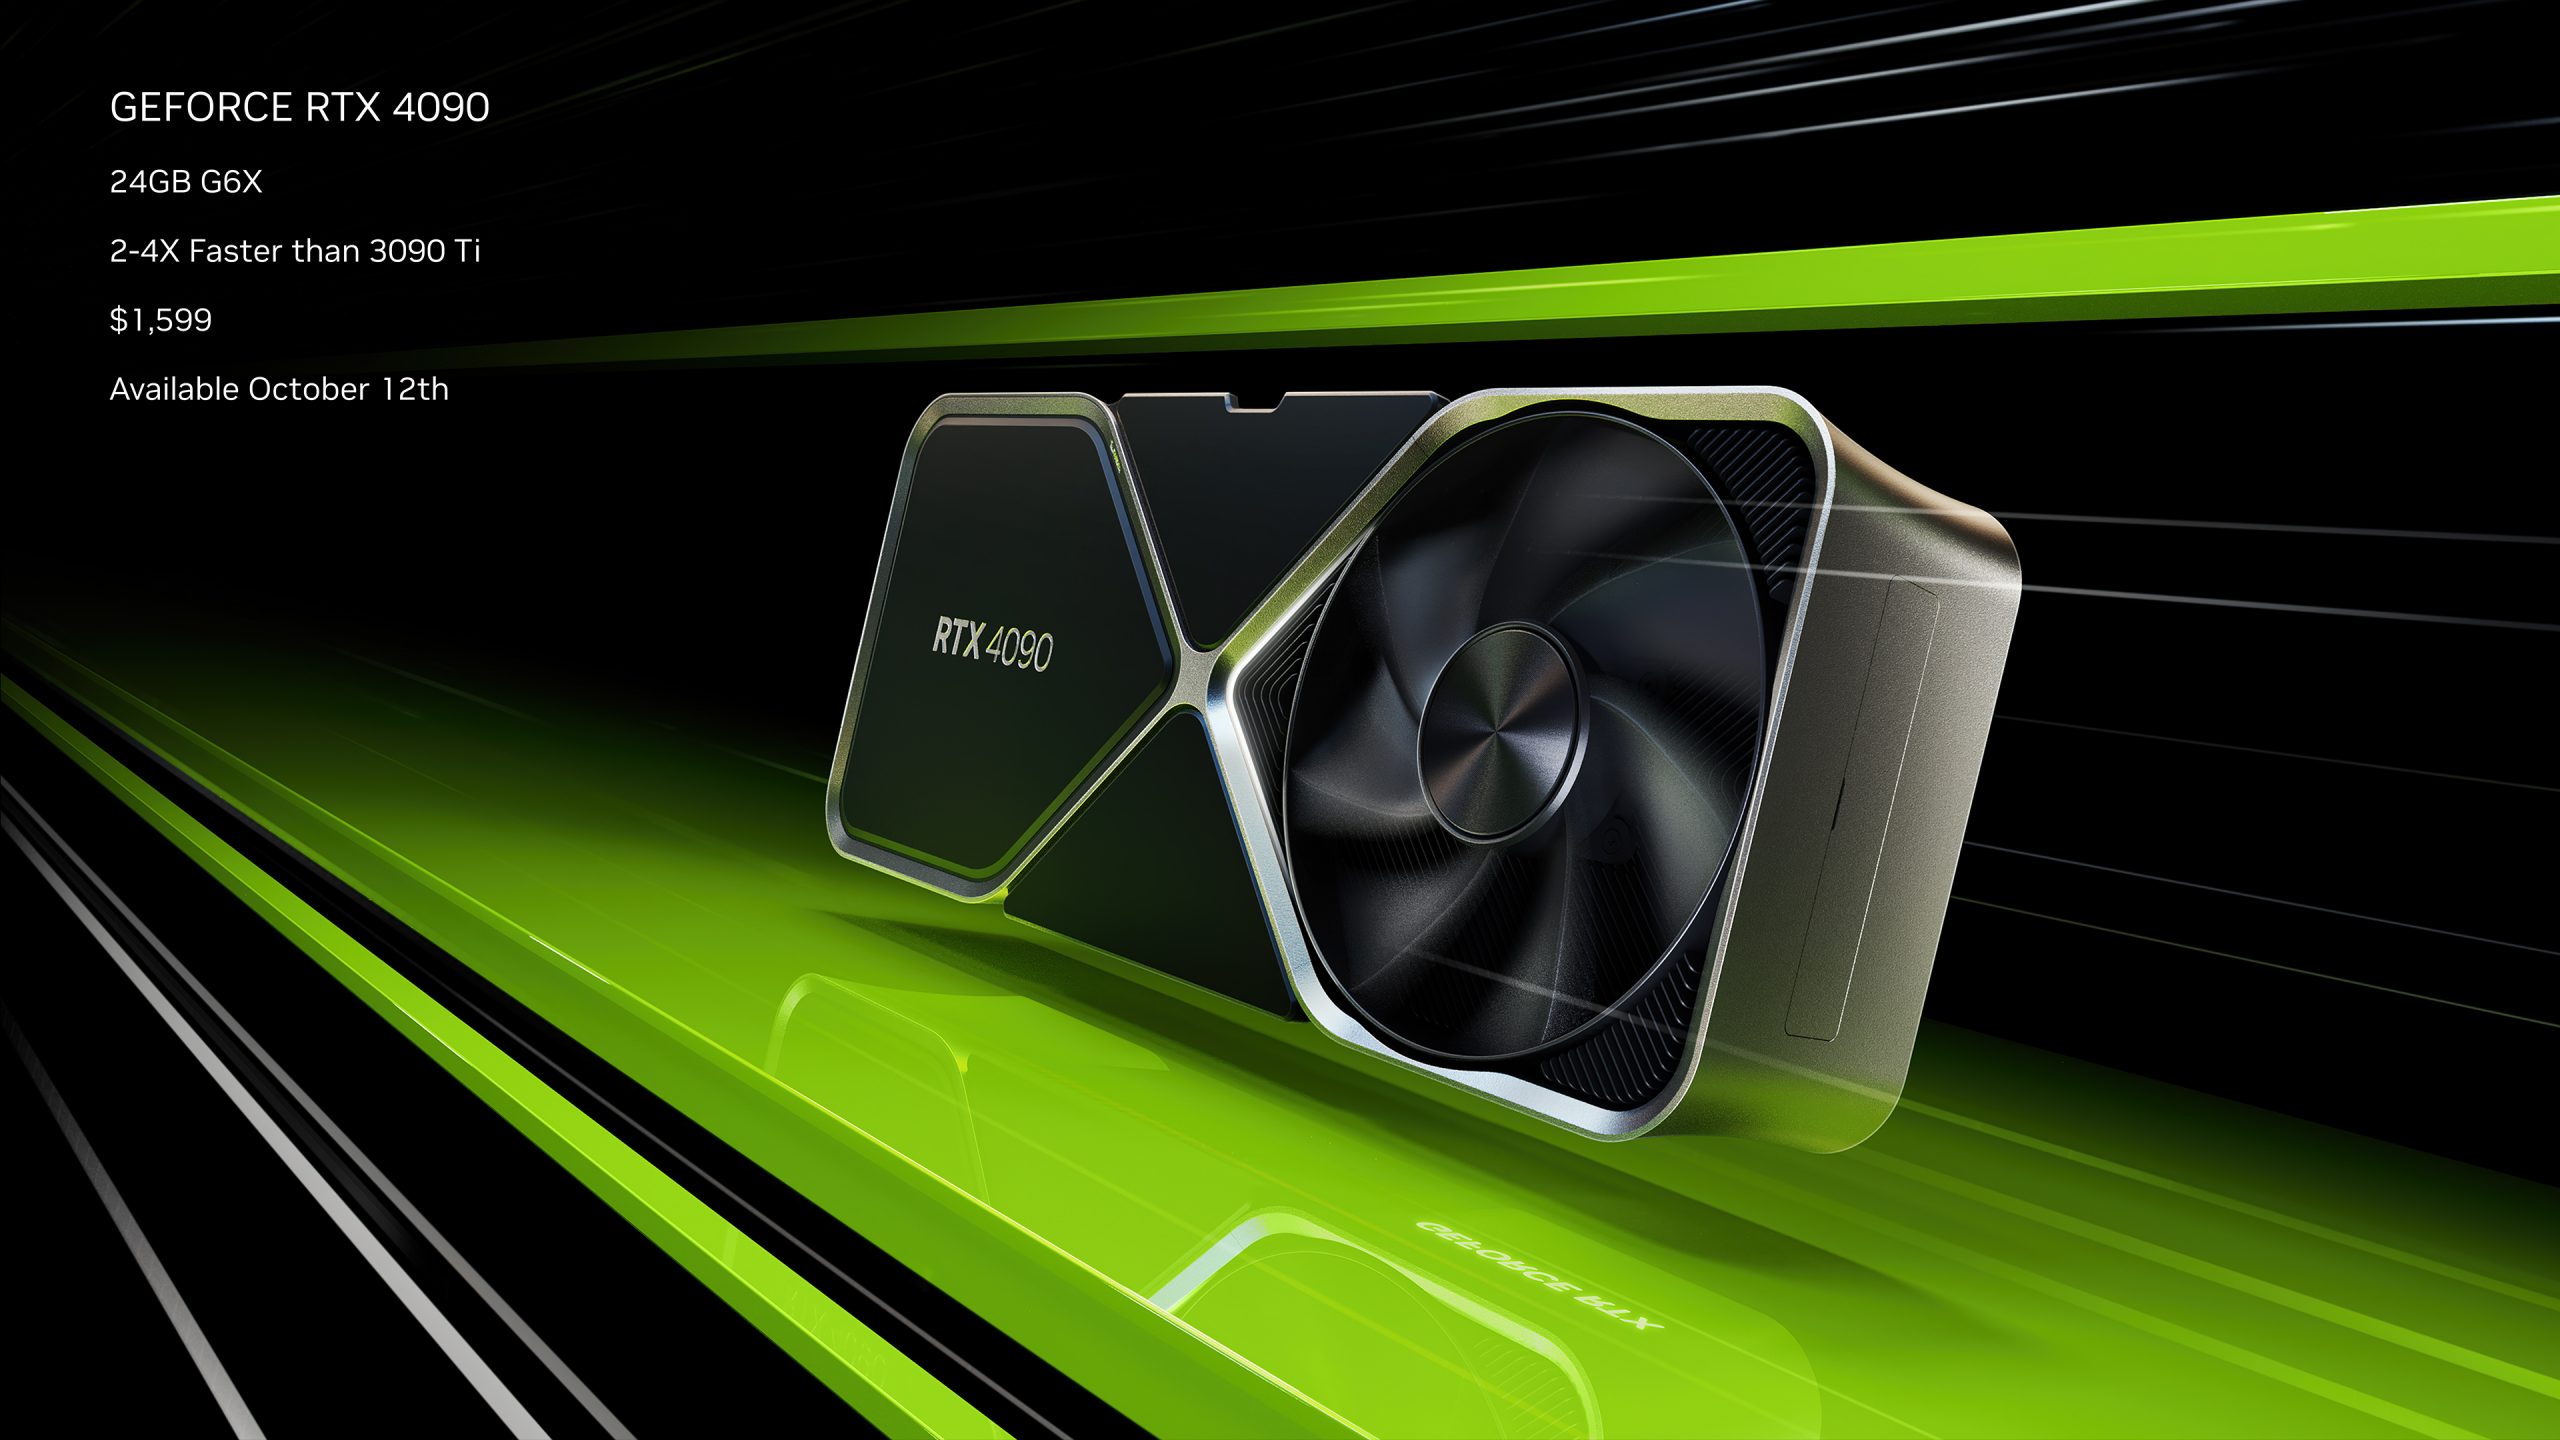 Geforce Rtx 4090 Graphics Card Available October 12